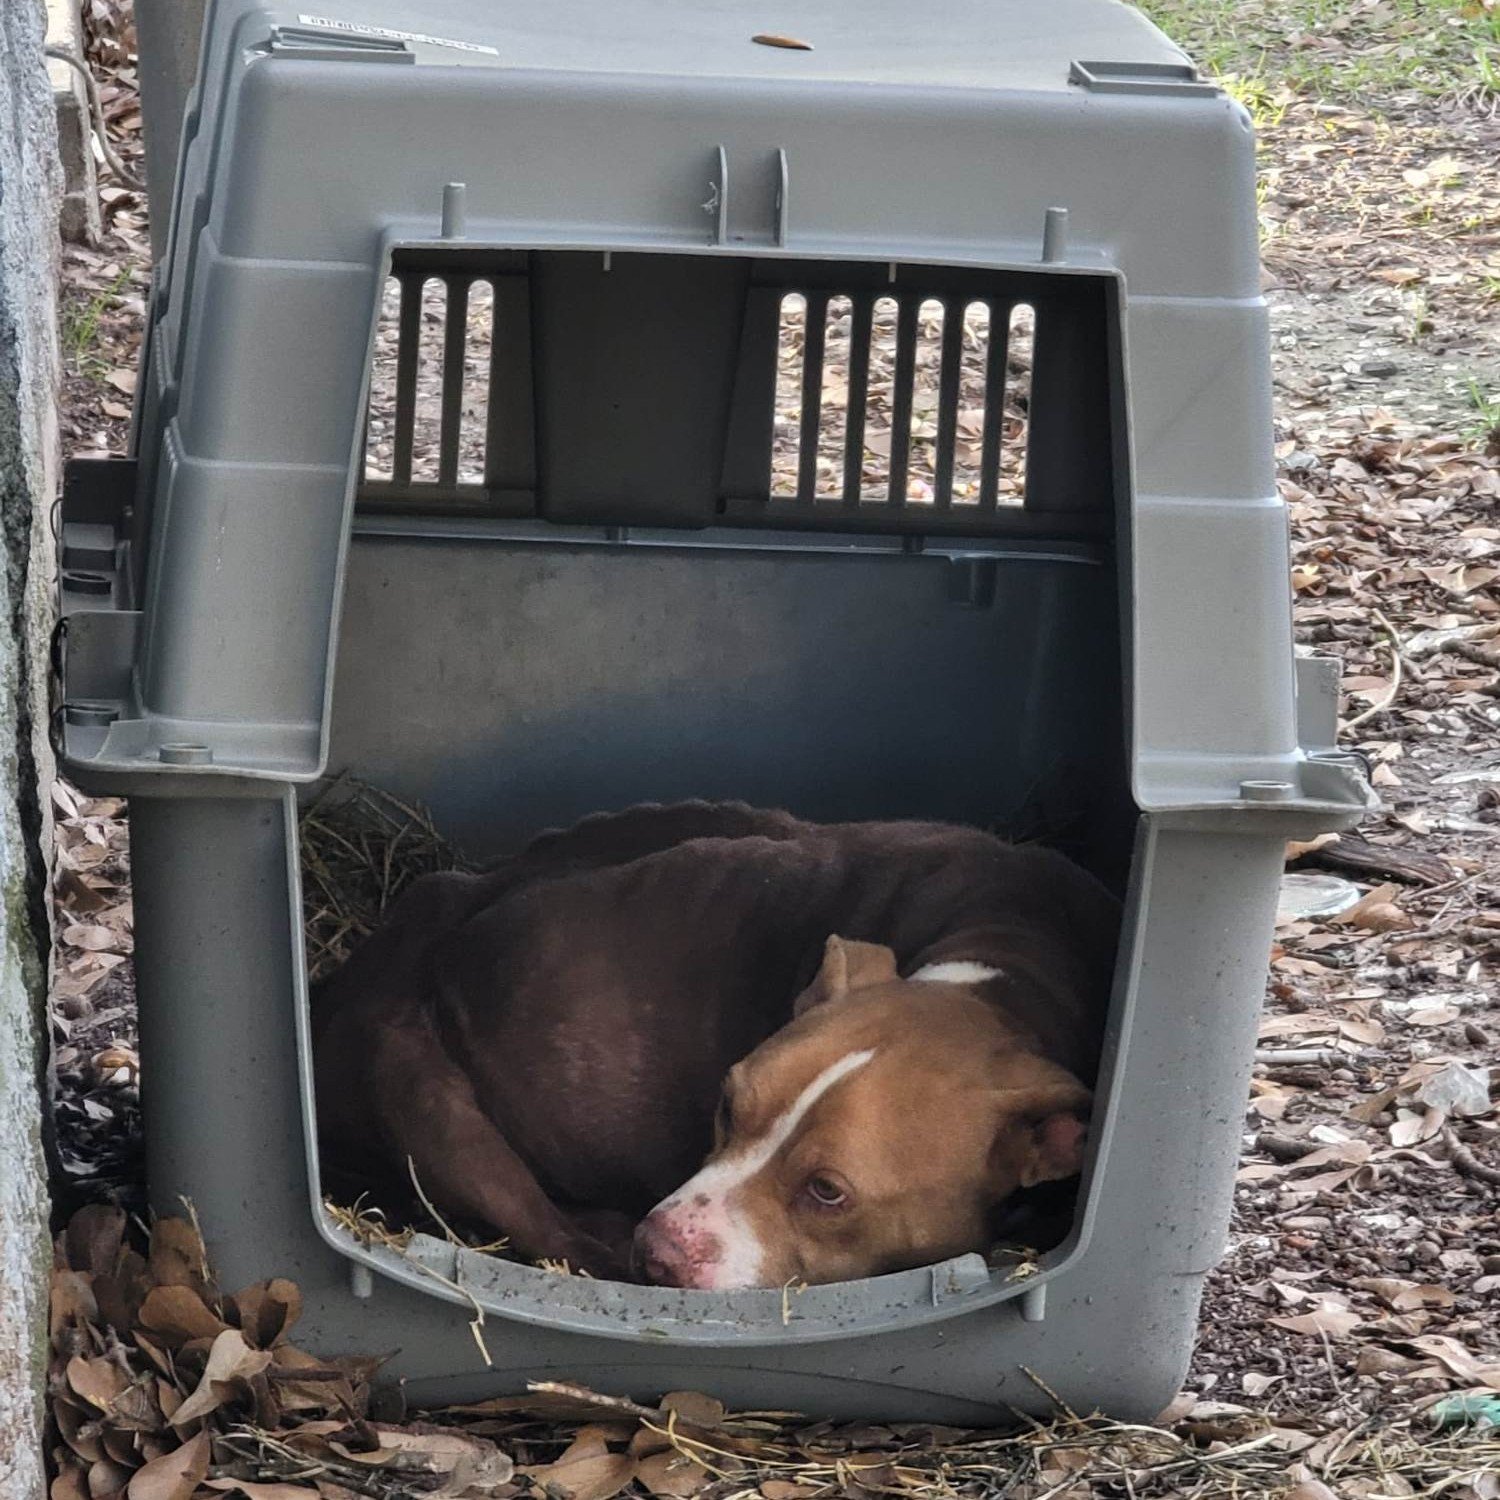 Abandoned dog laying in the box